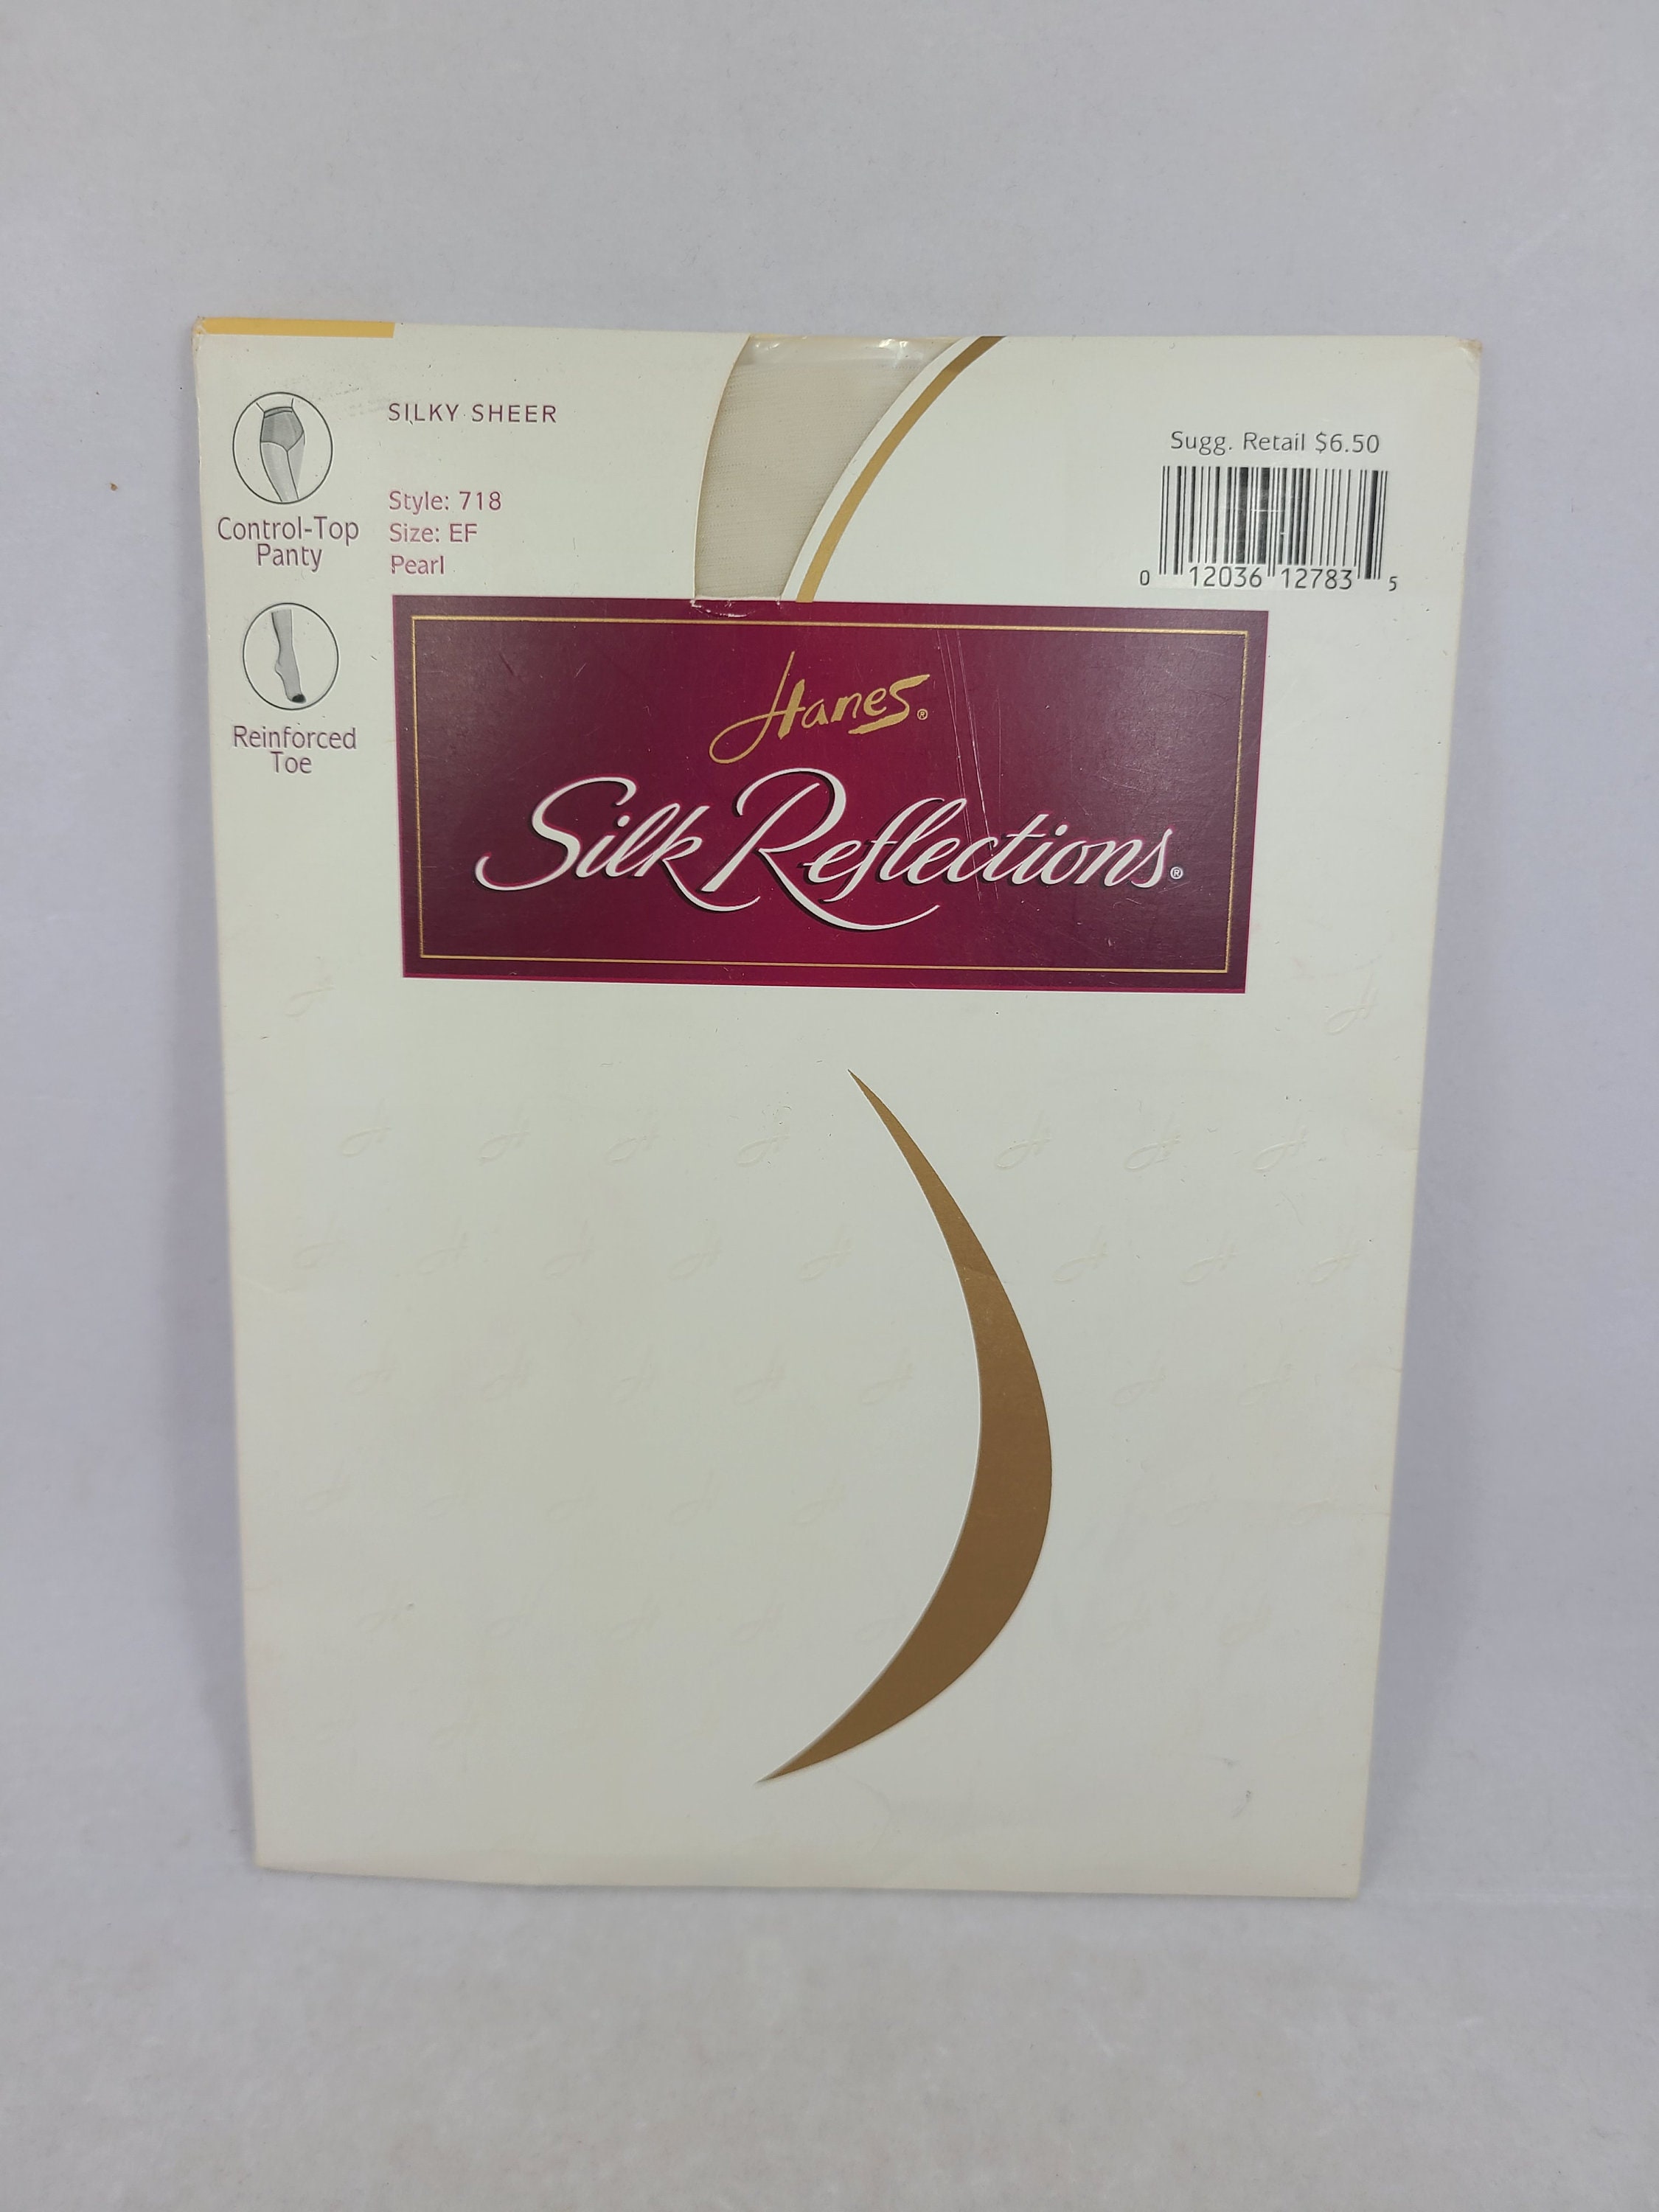 Hanes Silk Reflections Silky Sheer Pearl Control Top Nylons Size